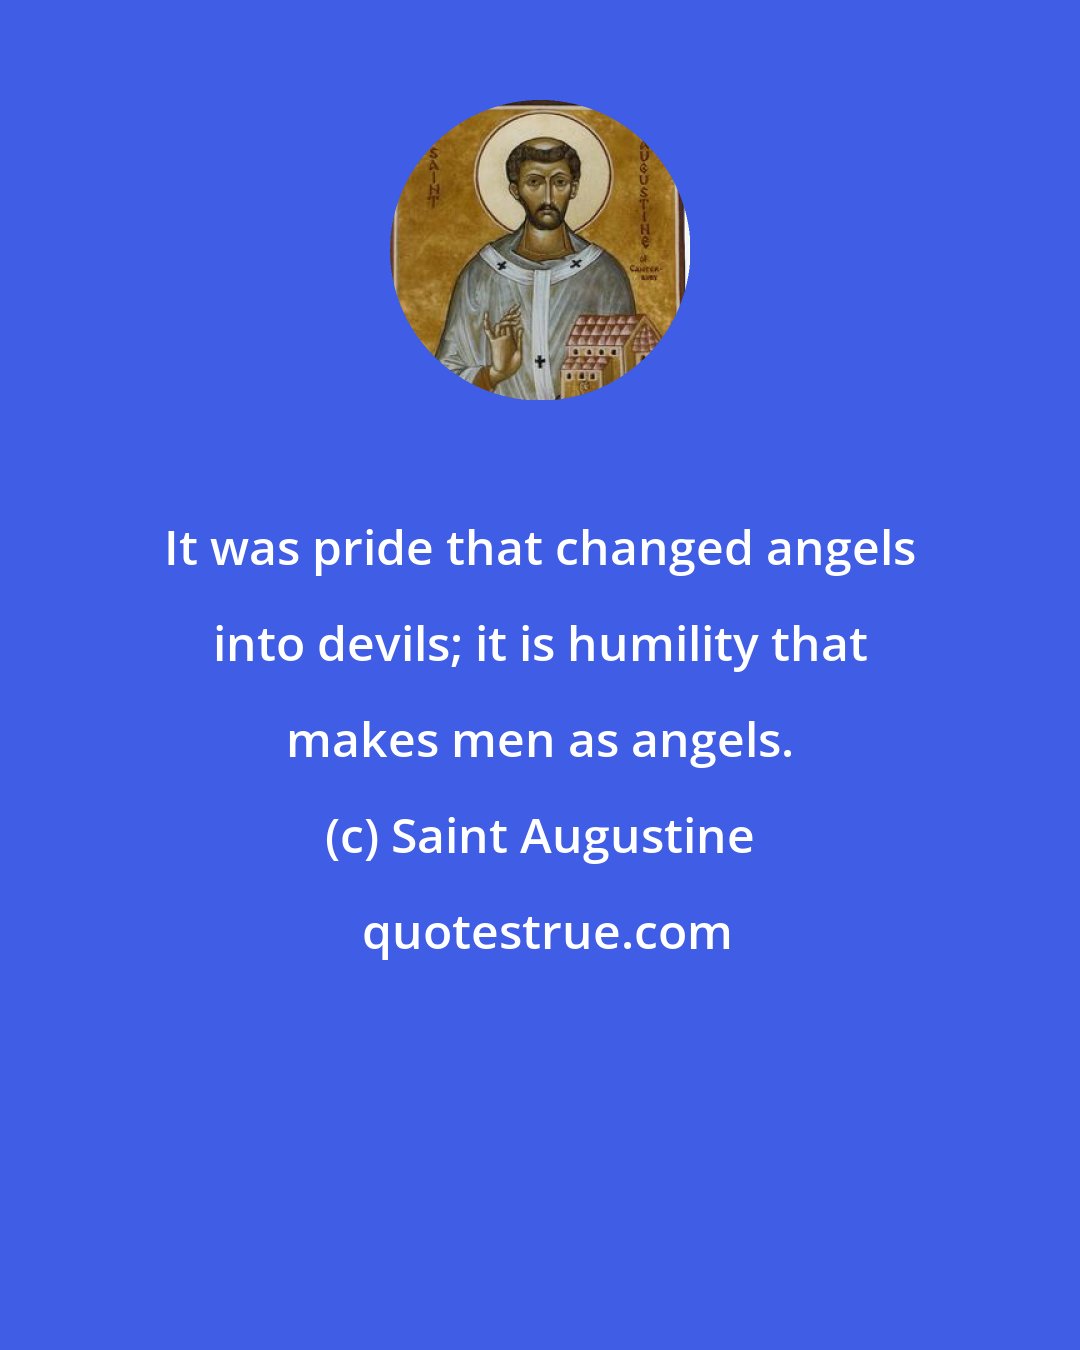 Saint Augustine: It was pride that changed angels into devils; it is humility that makes men as angels.